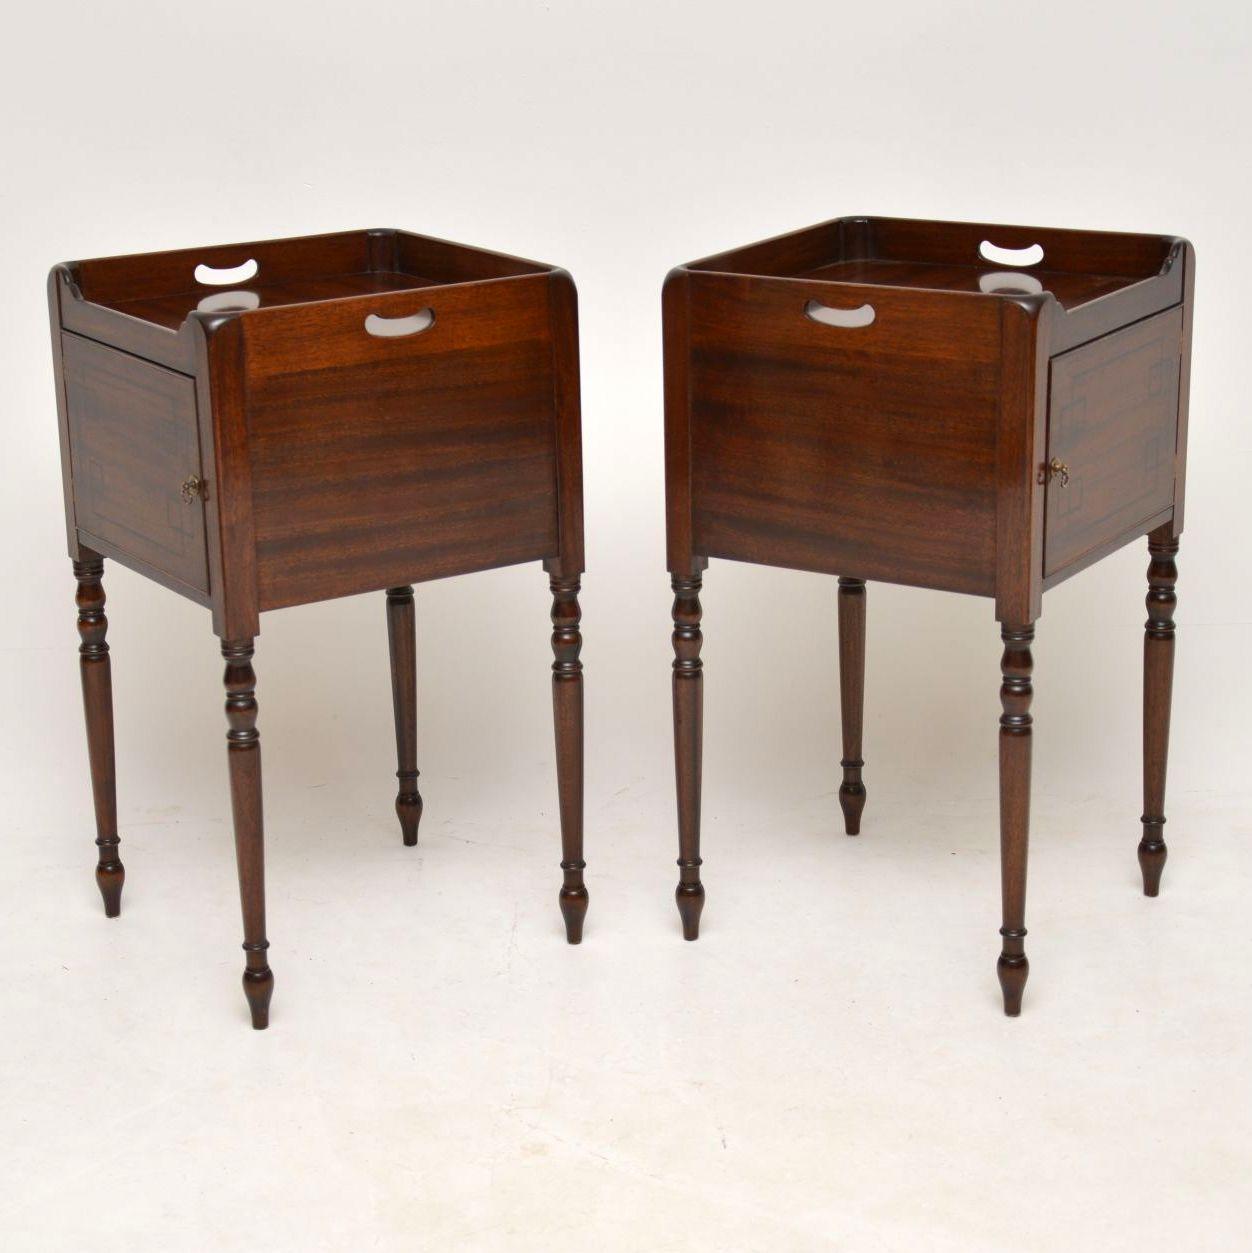 Pair of Antique Inlaid Mahogany Bedside Cabinets (Mitte des 20. Jahrhunderts)